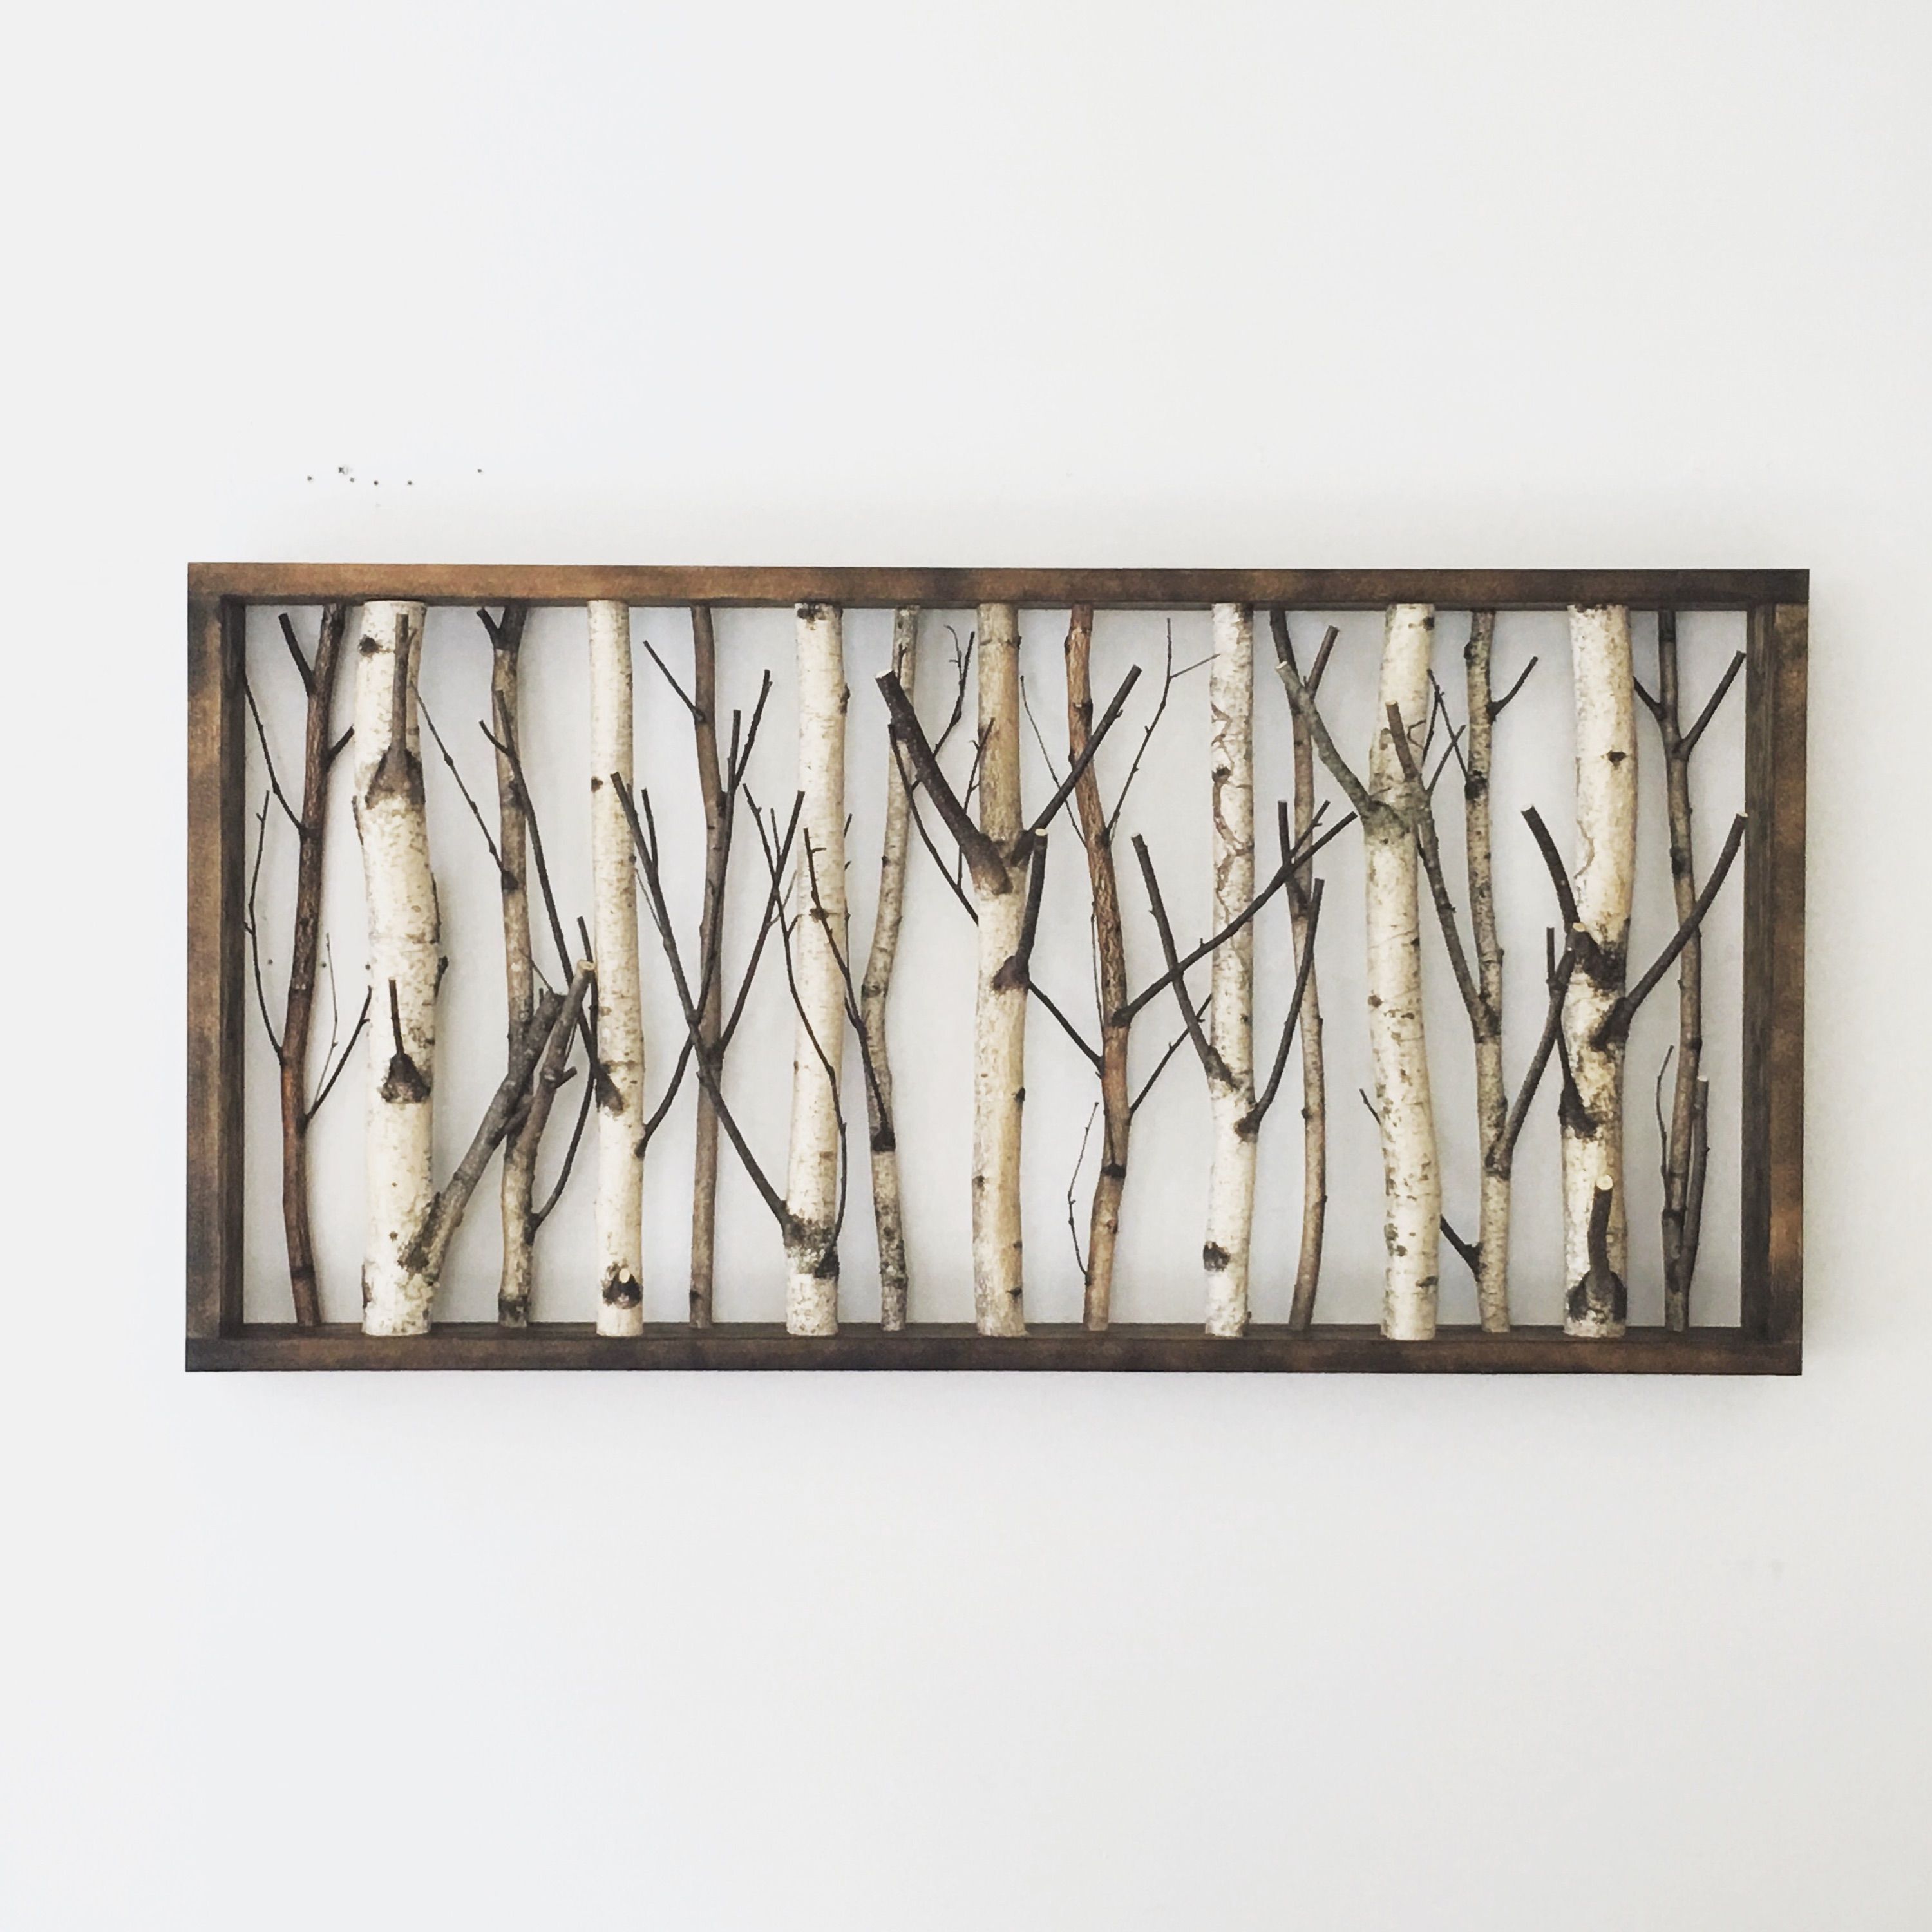 White Birch Forest Wall Art – 30 X 12, Birch Branch Decor, Birch Log Intended For Recent Tree Of Life Wall Decor By Red Barrel Studio (View 6 of 20)